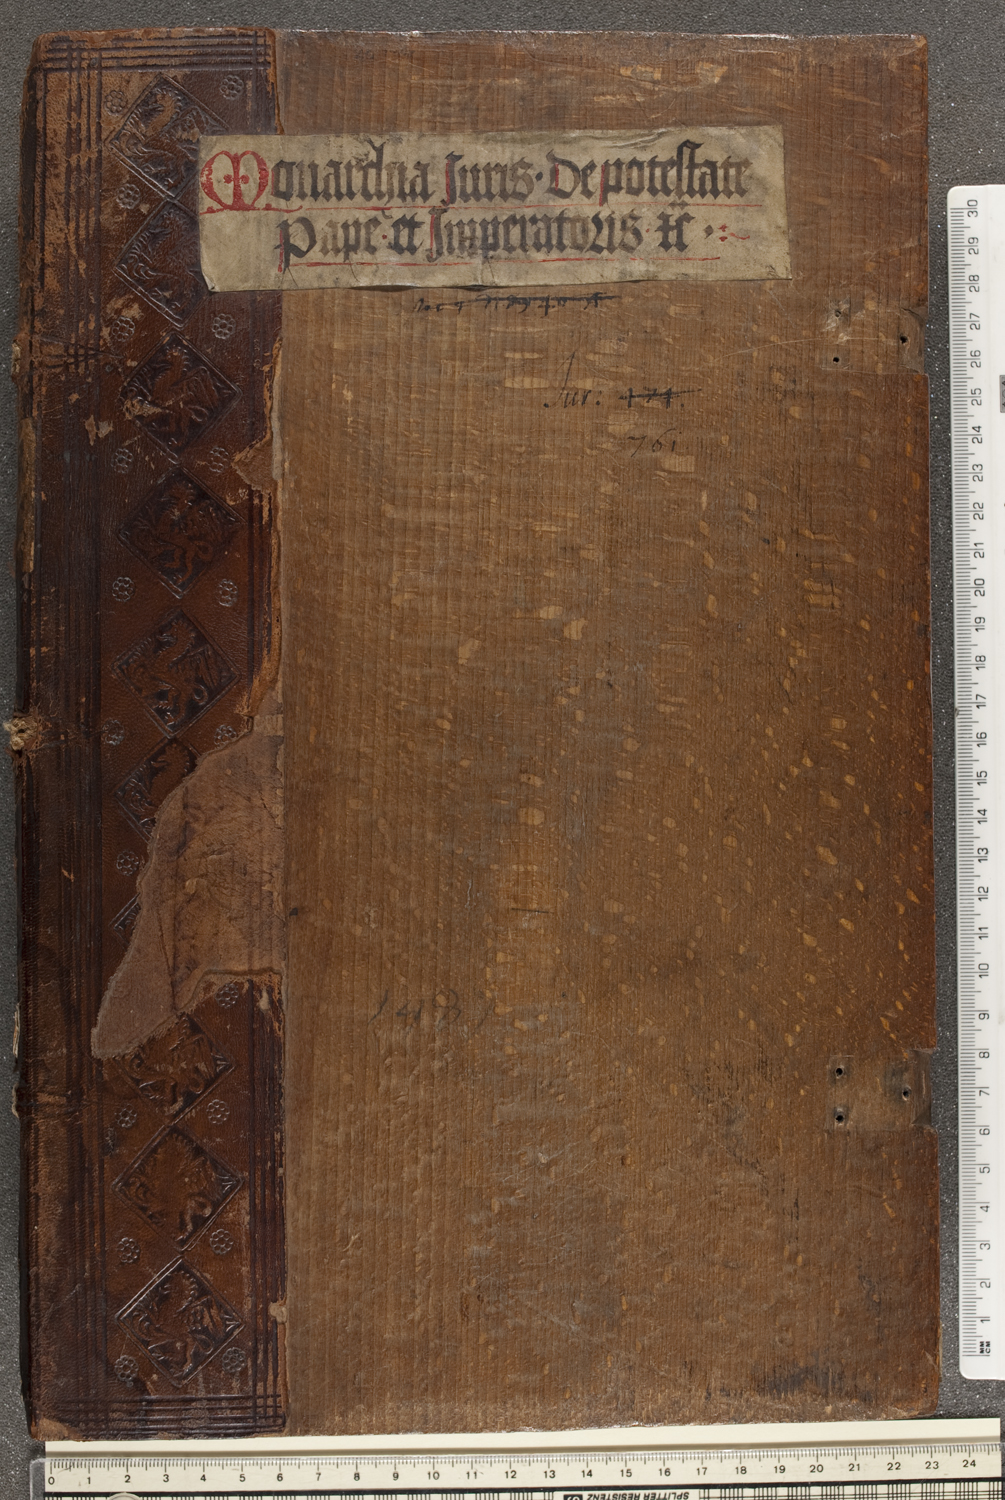 Front board of Hartmann Schedel's copy of Roselli's Monarchia, bearing similar stamps to the incunabula in question